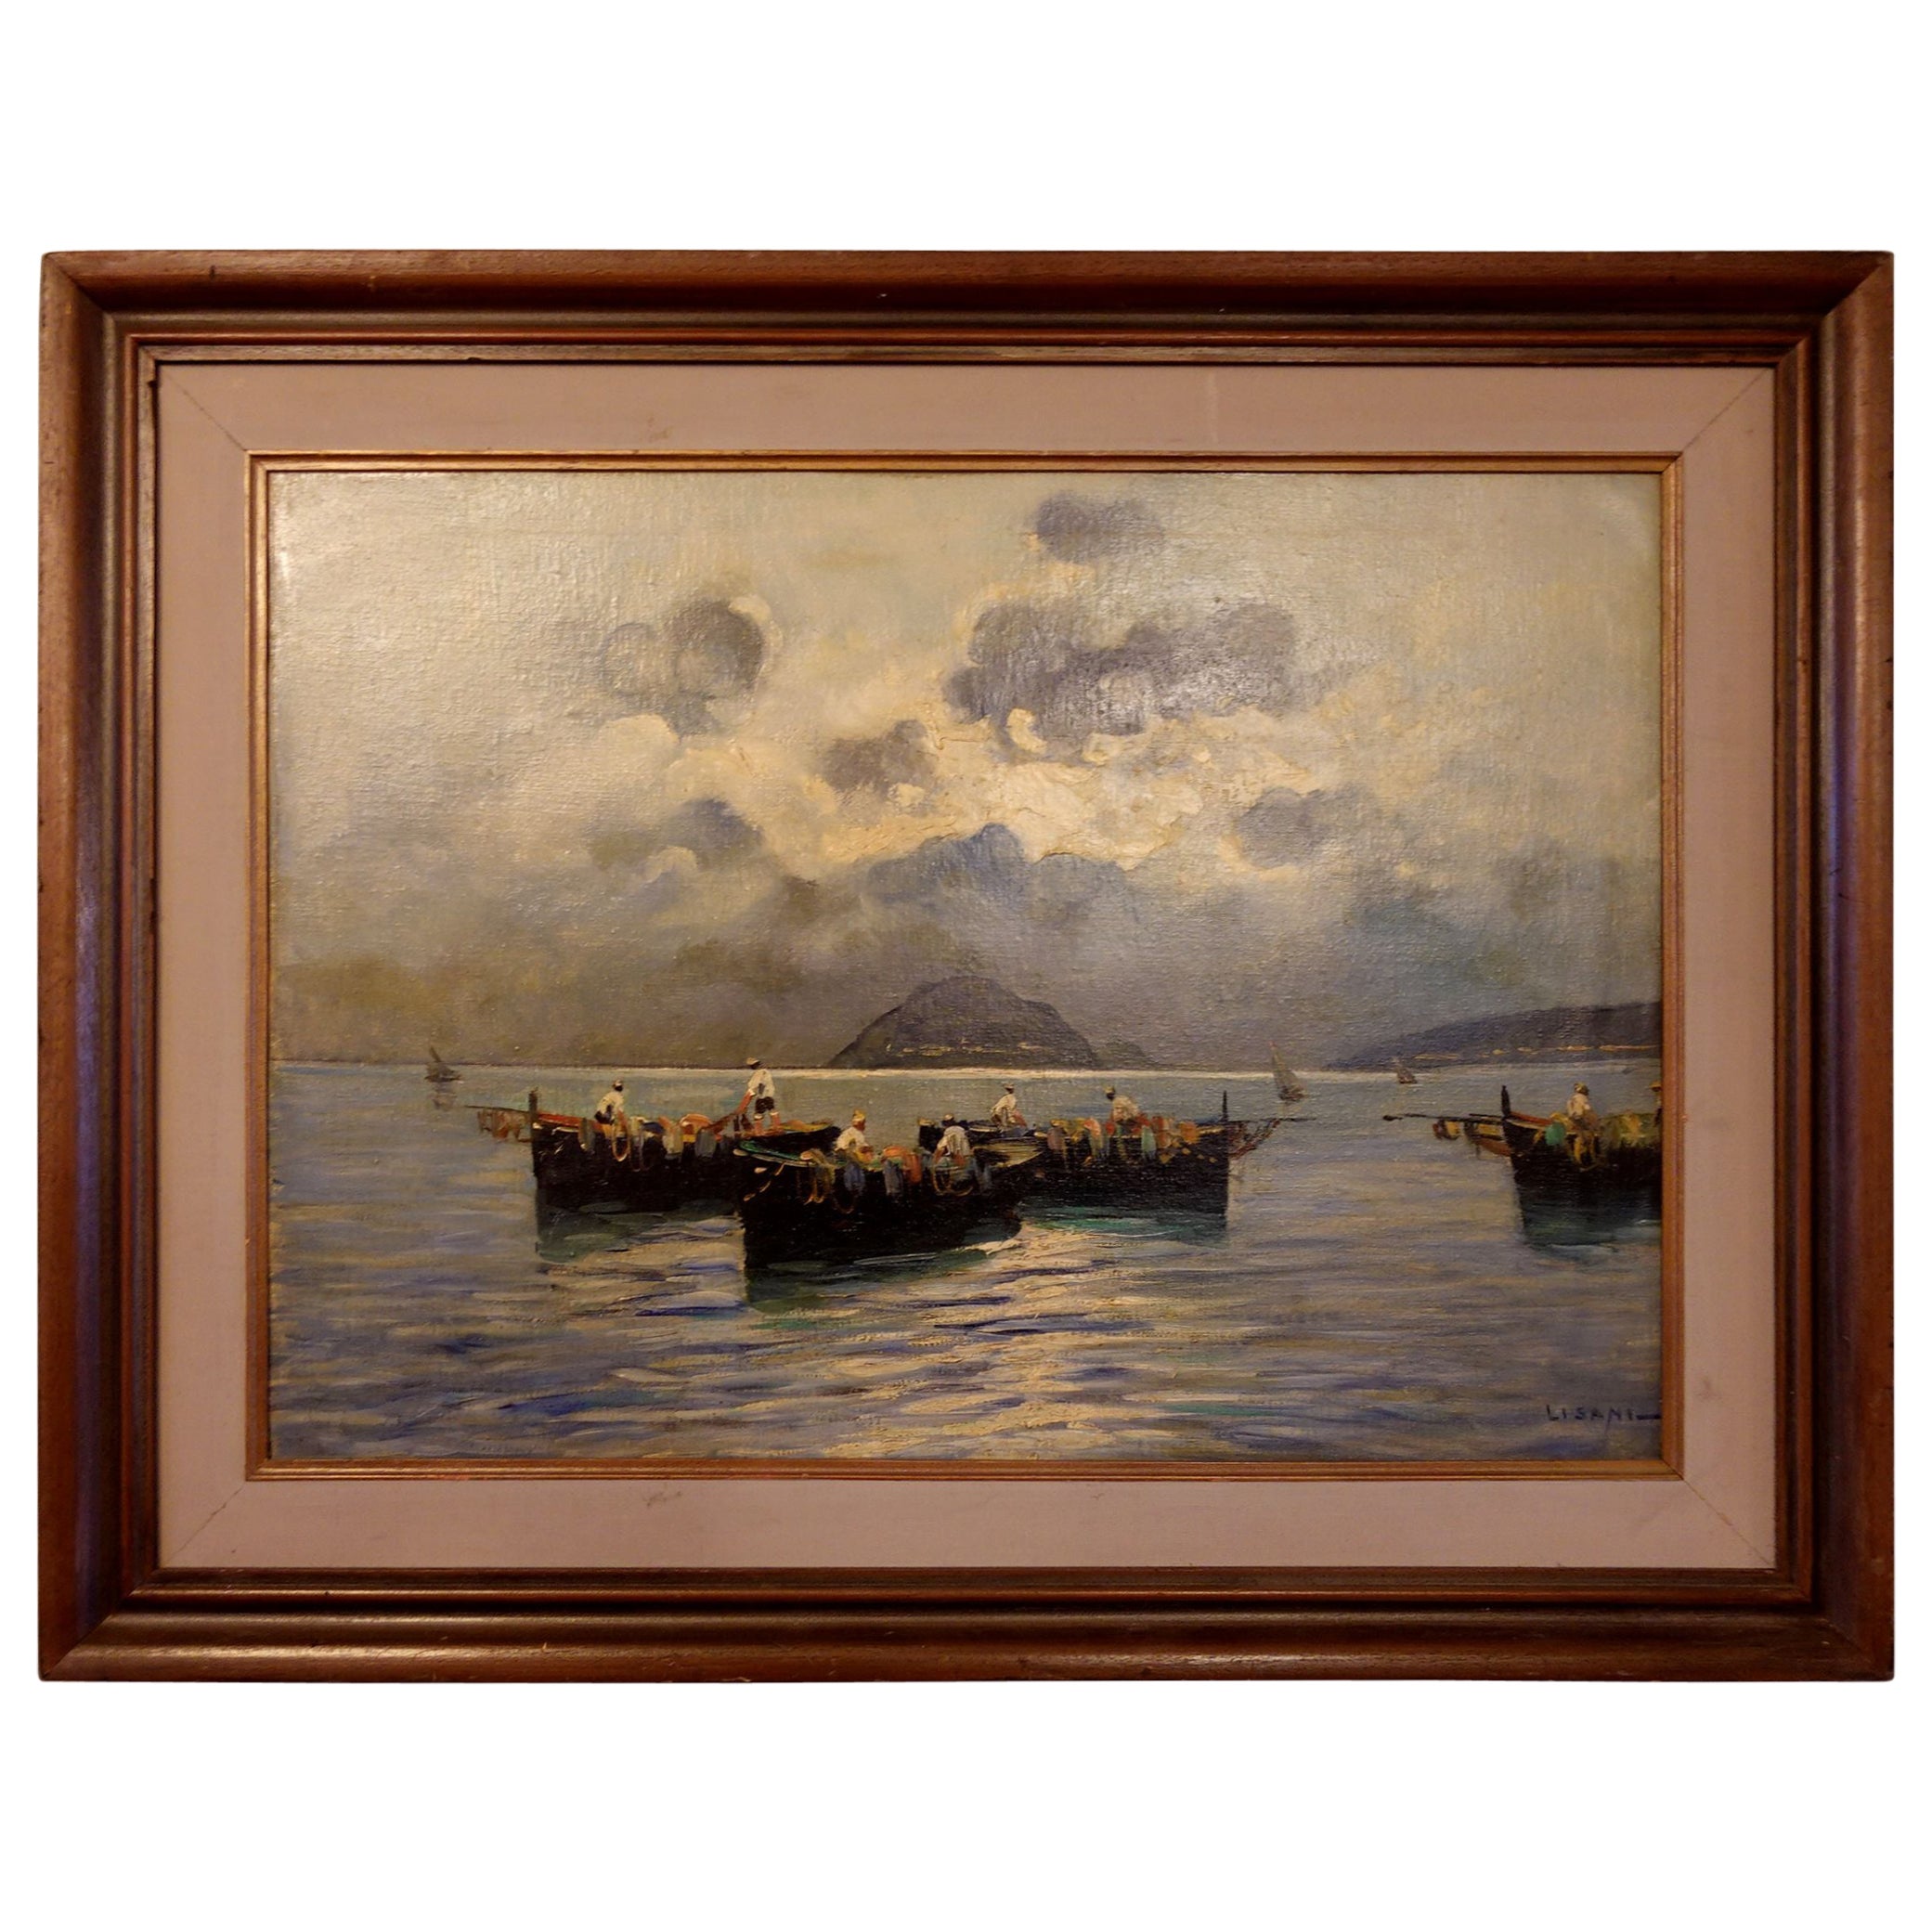  Oil Painting, "Seascape Fisherman", by Lisani For Sale